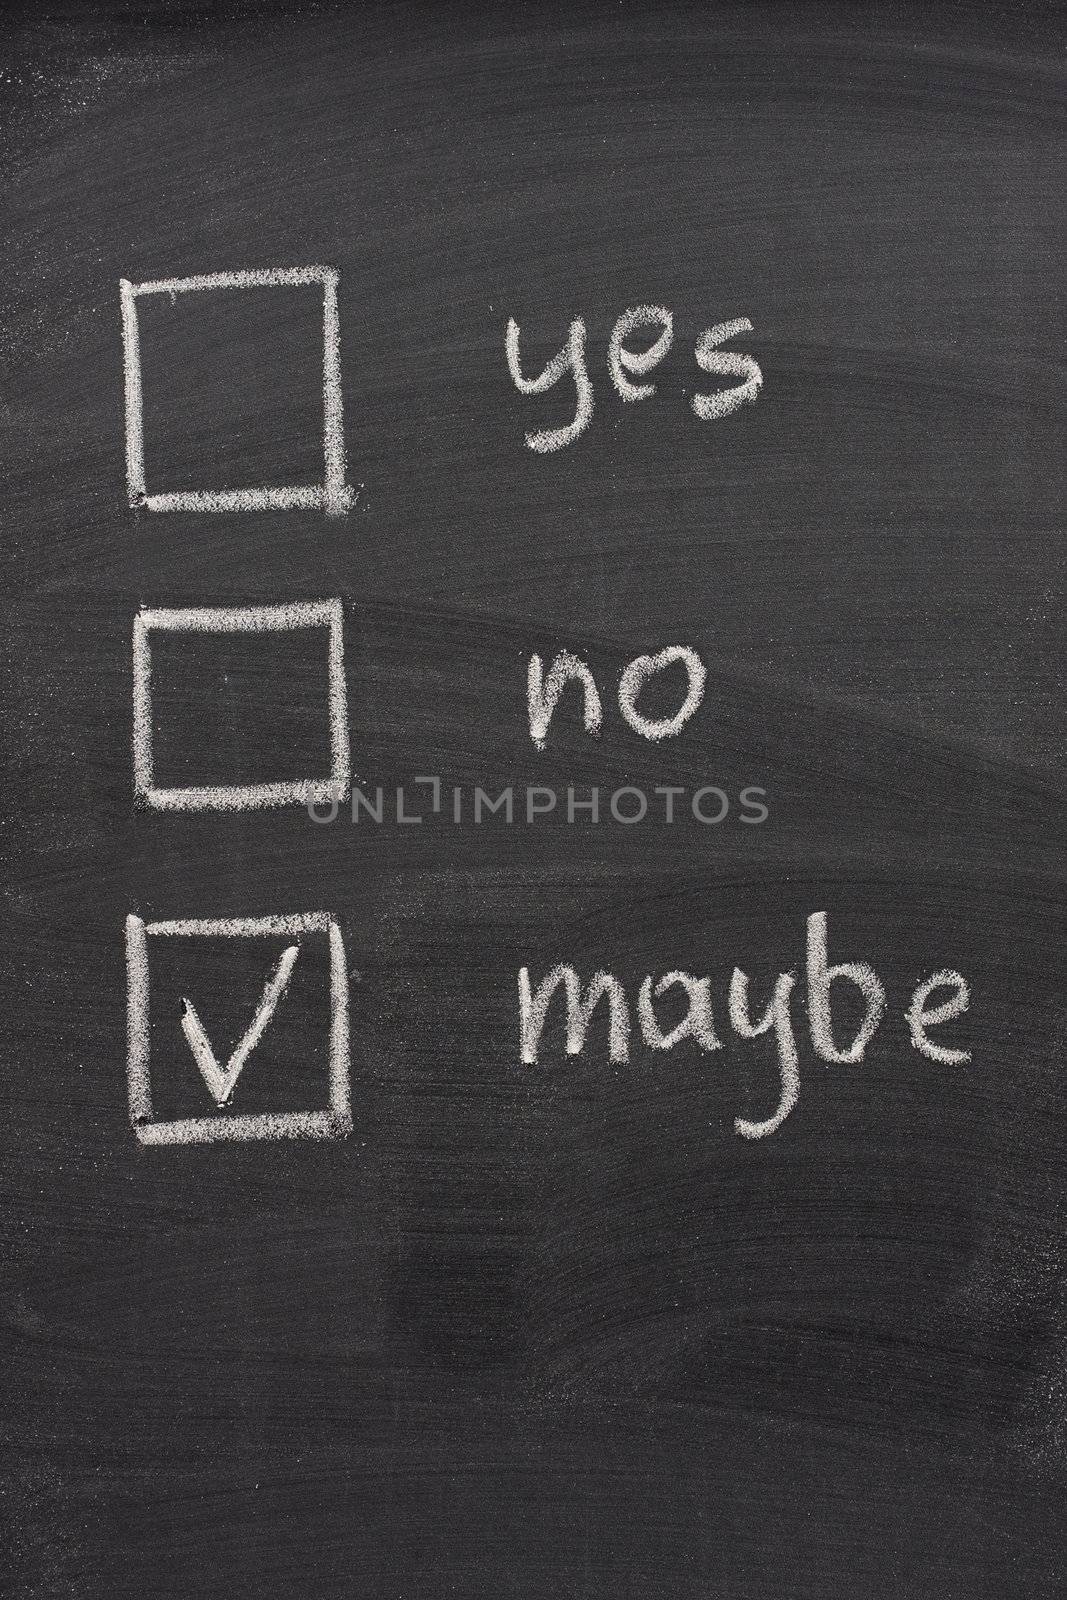 undecided - yes, no and maybe check boxes on blackboard by PixelsAway